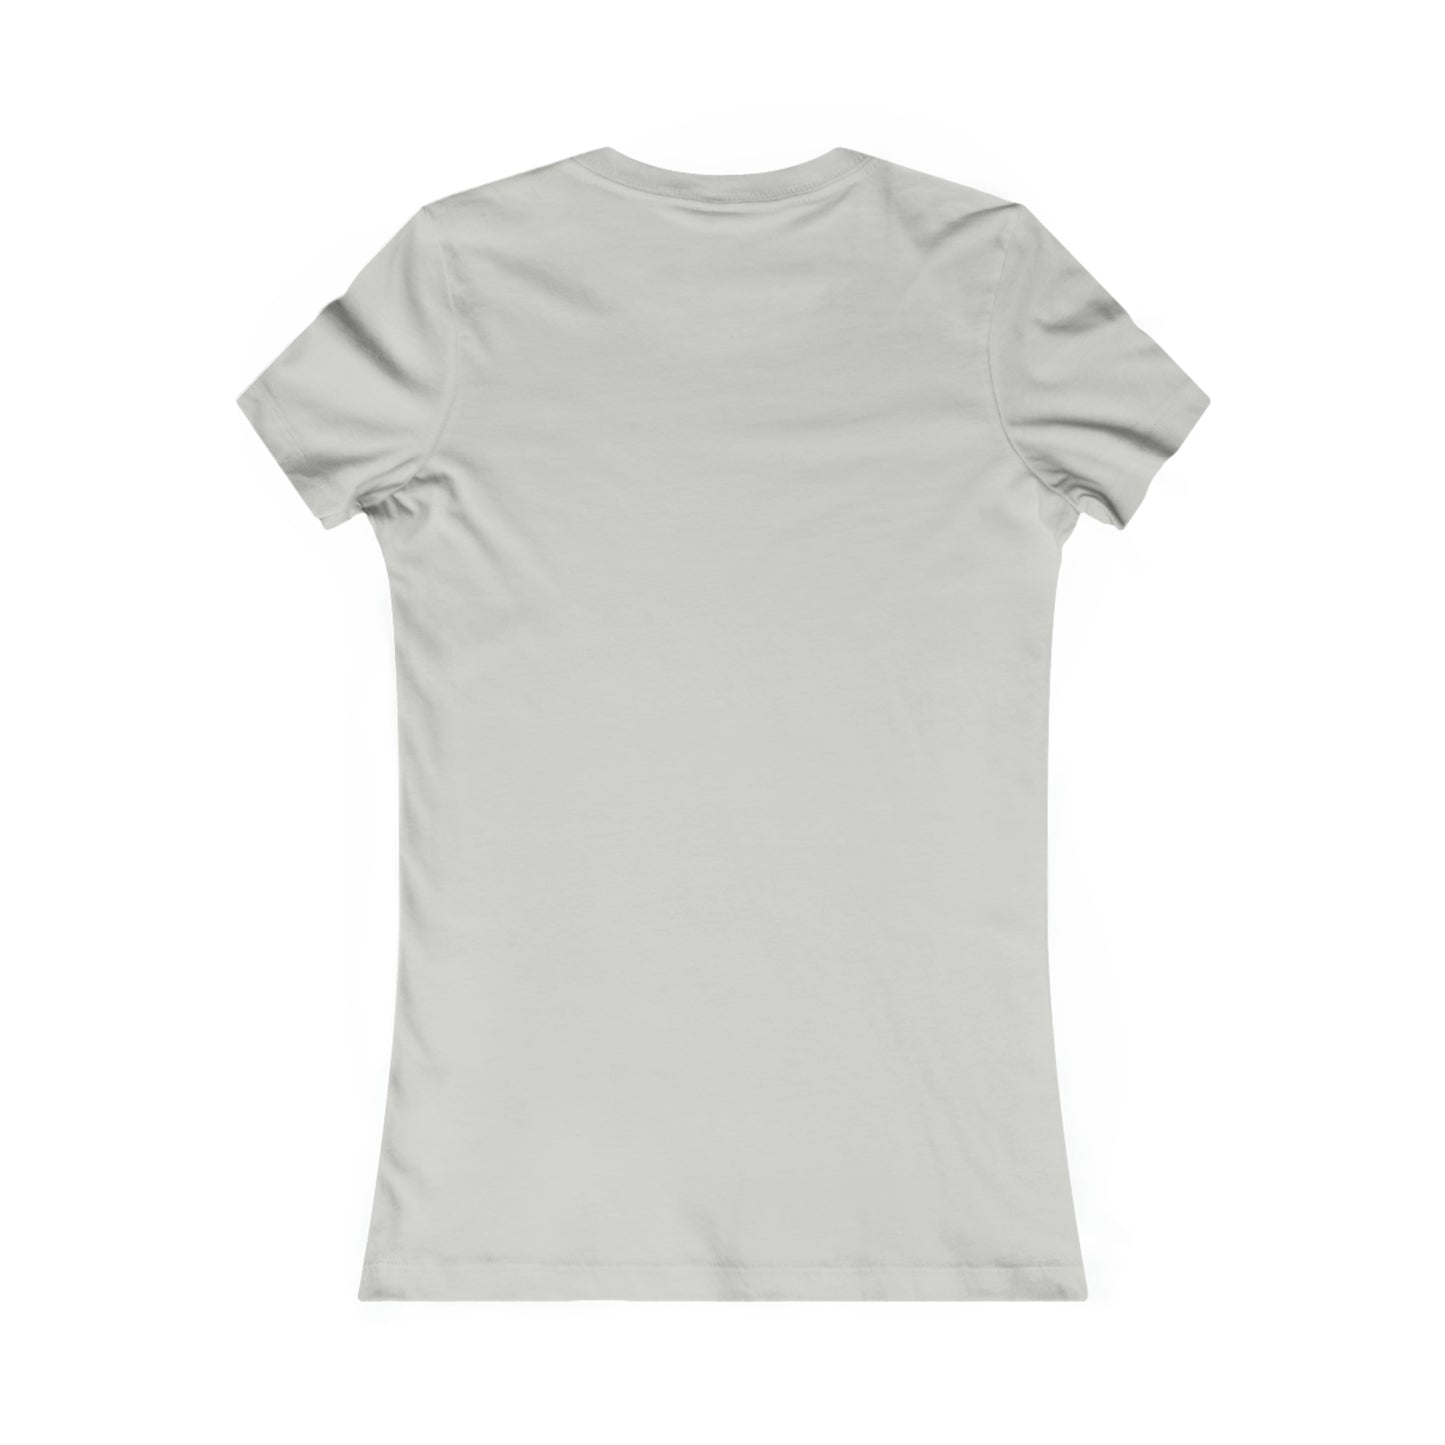 Boutique - "engineered For Excellence" - Ladies Favorite T-Shirt